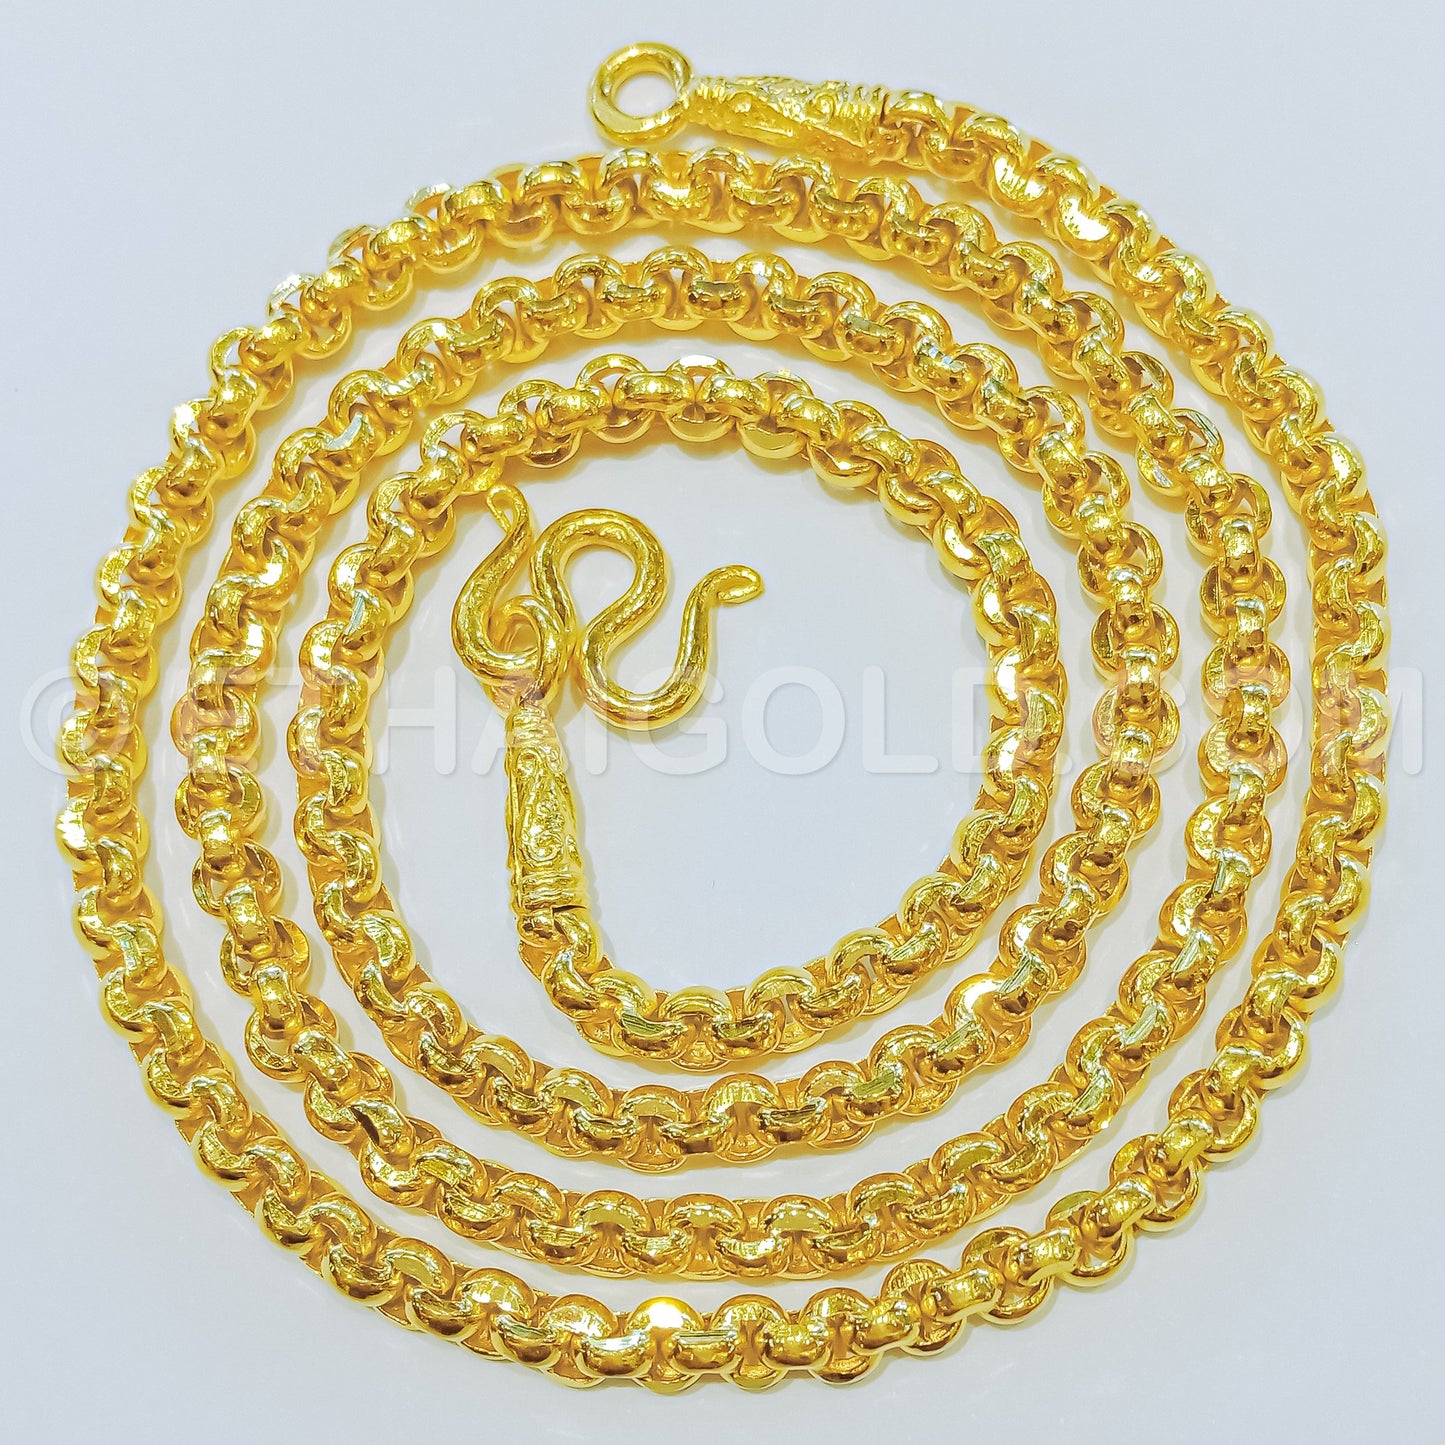 1 BAHT POLISHED DIAMOND-CUT SOLID ROLO CHAIN NECKLACE IN 23K GOLD (ID: N2501B)